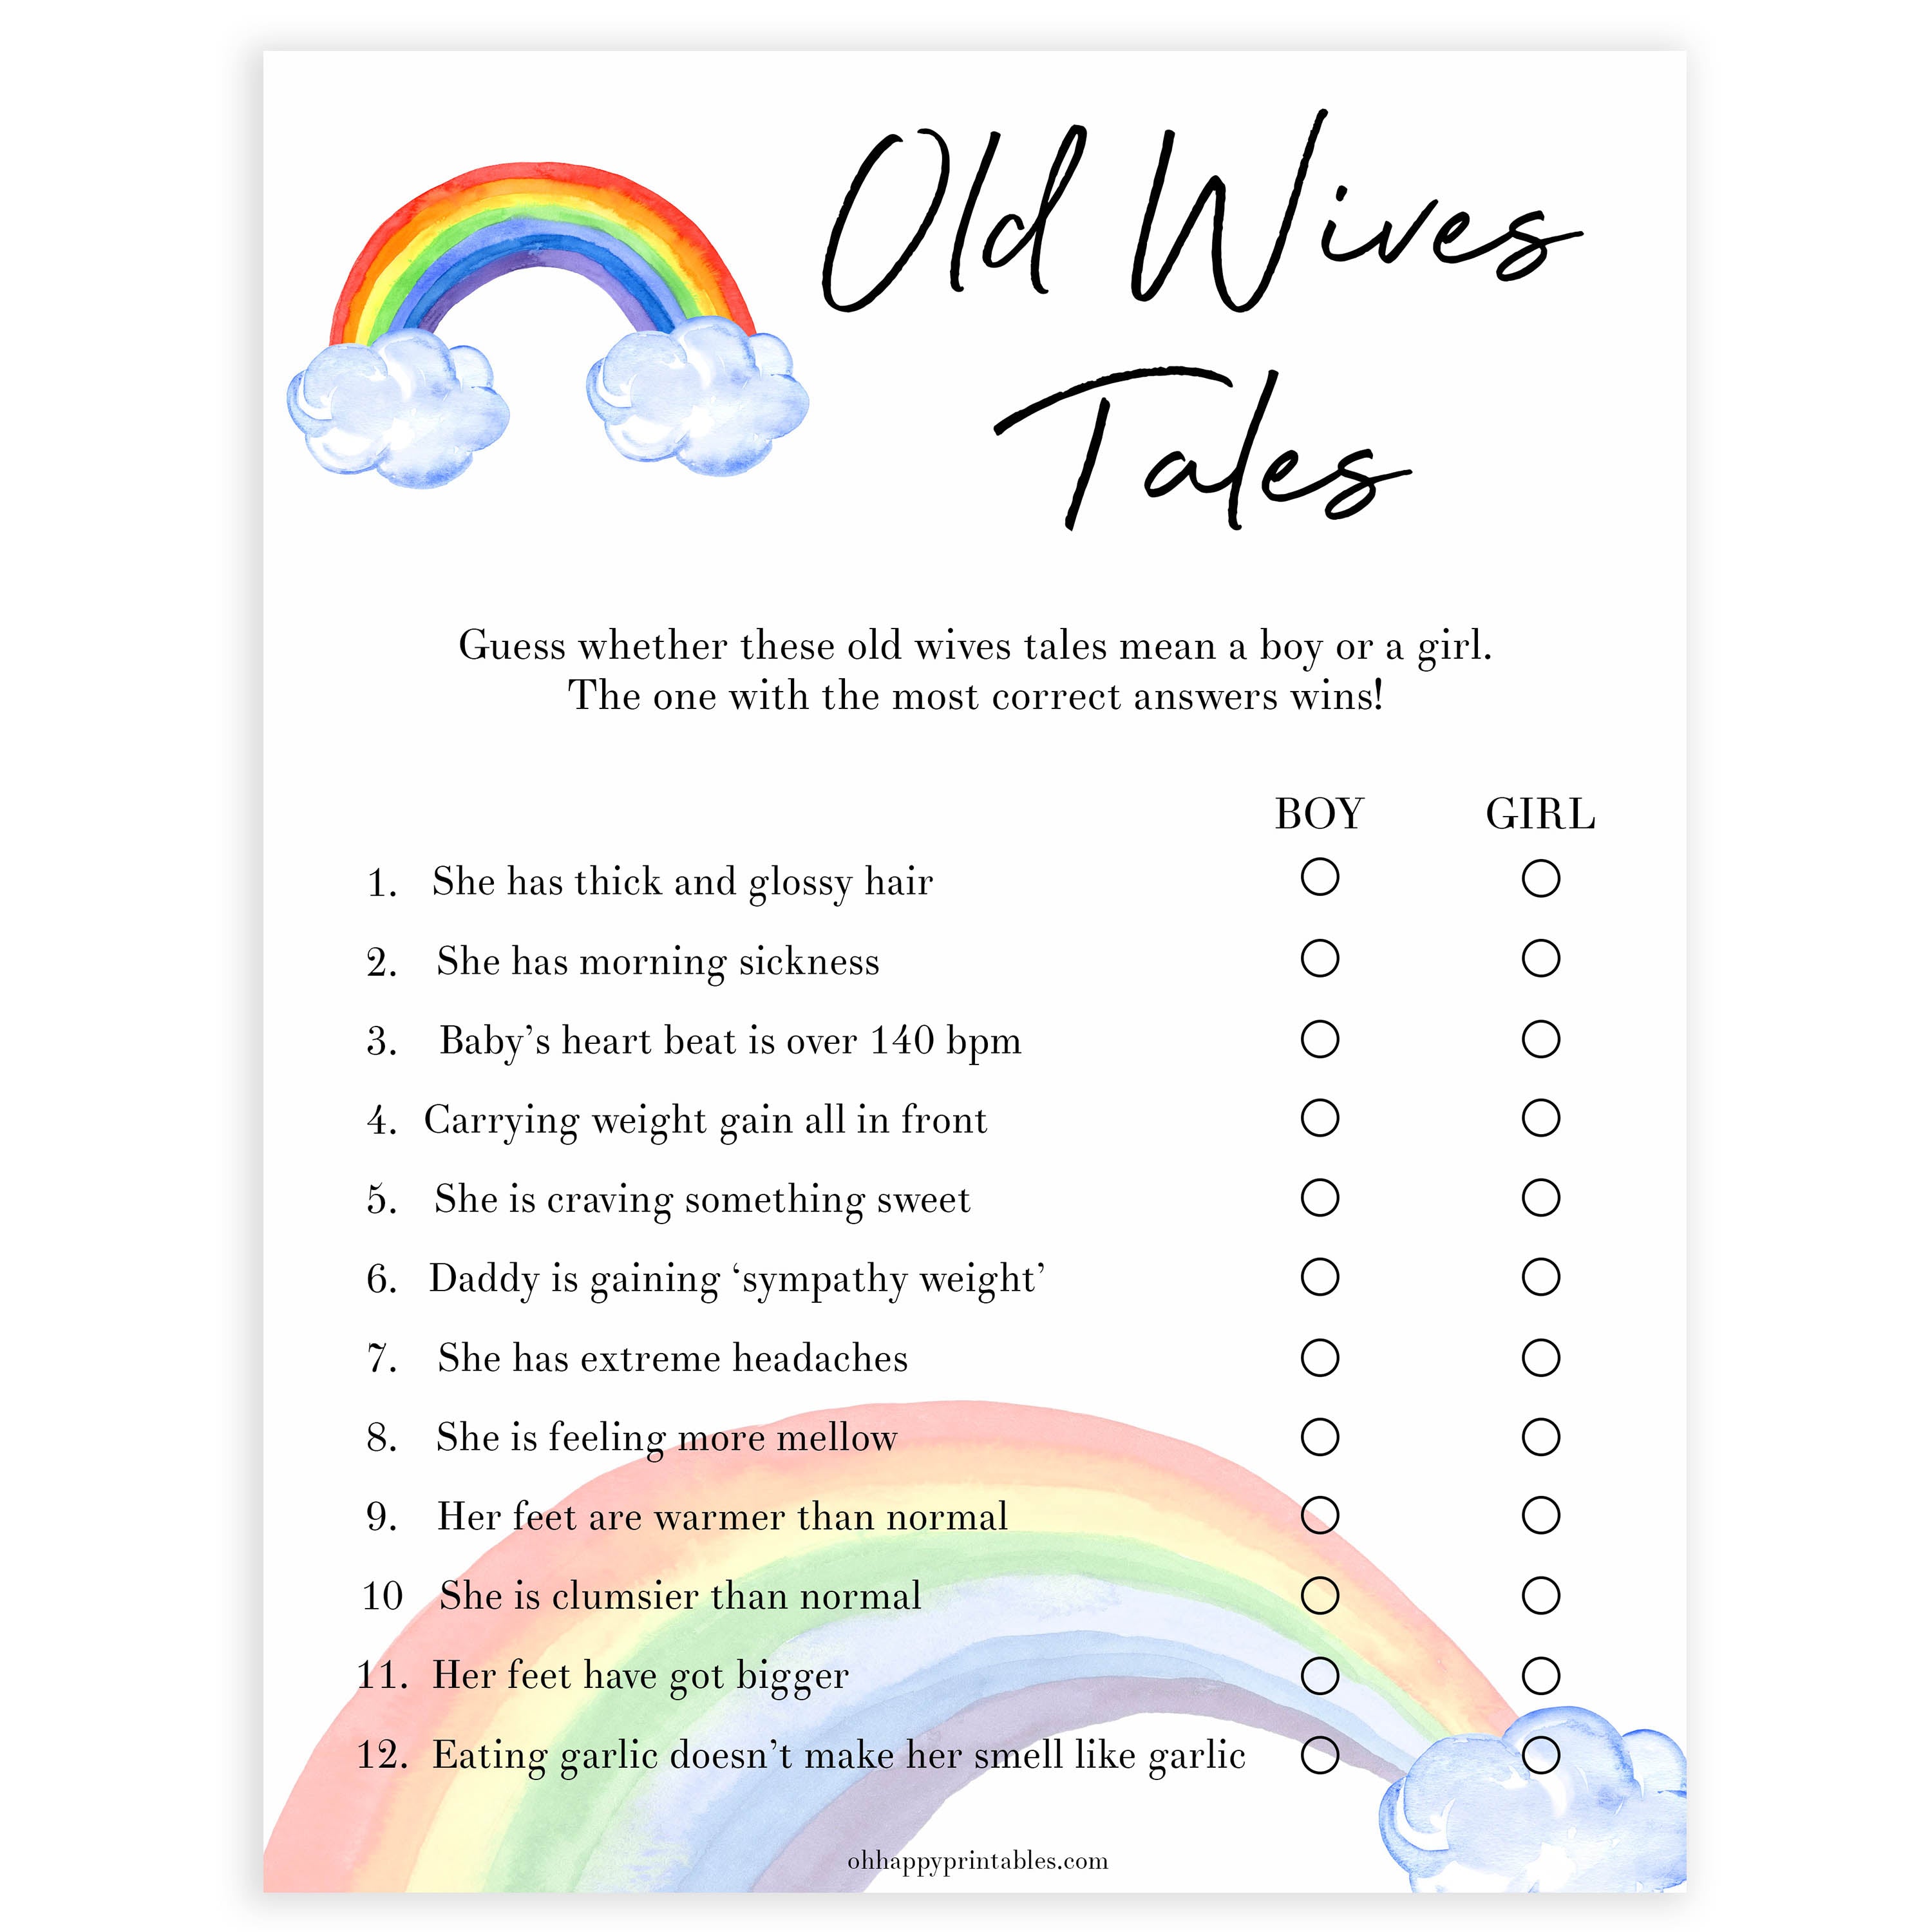 Rainbow baby games, rainbow old wives tales, rainbow printable baby games, instant download games, rainbow baby shower, printable baby games, fun baby games, popular baby games, top 10 baby games